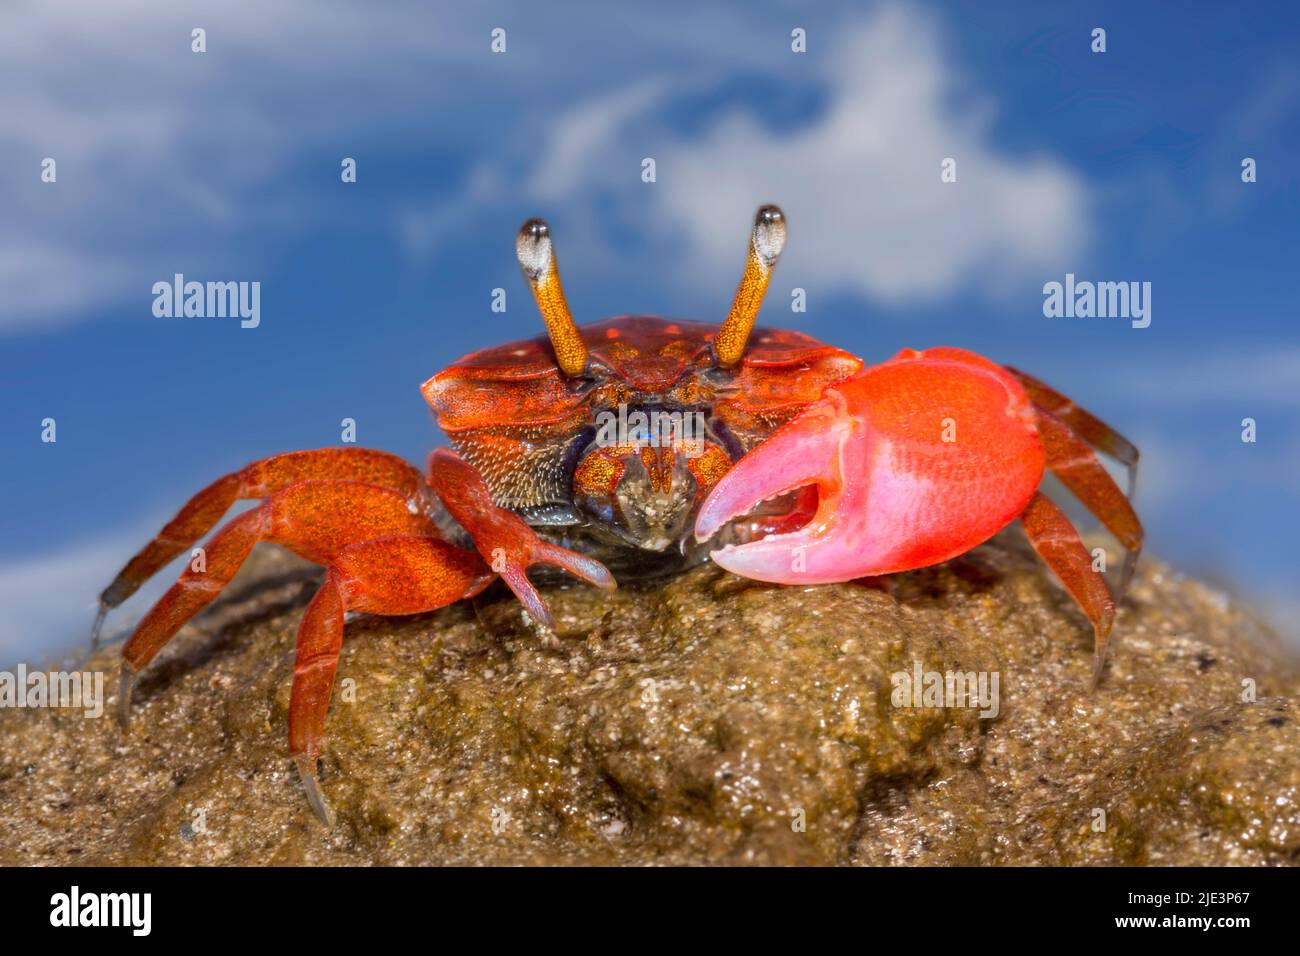 A male fiddler crab, Uca sp, on the island of Yap, Micronesia. Stock Photo